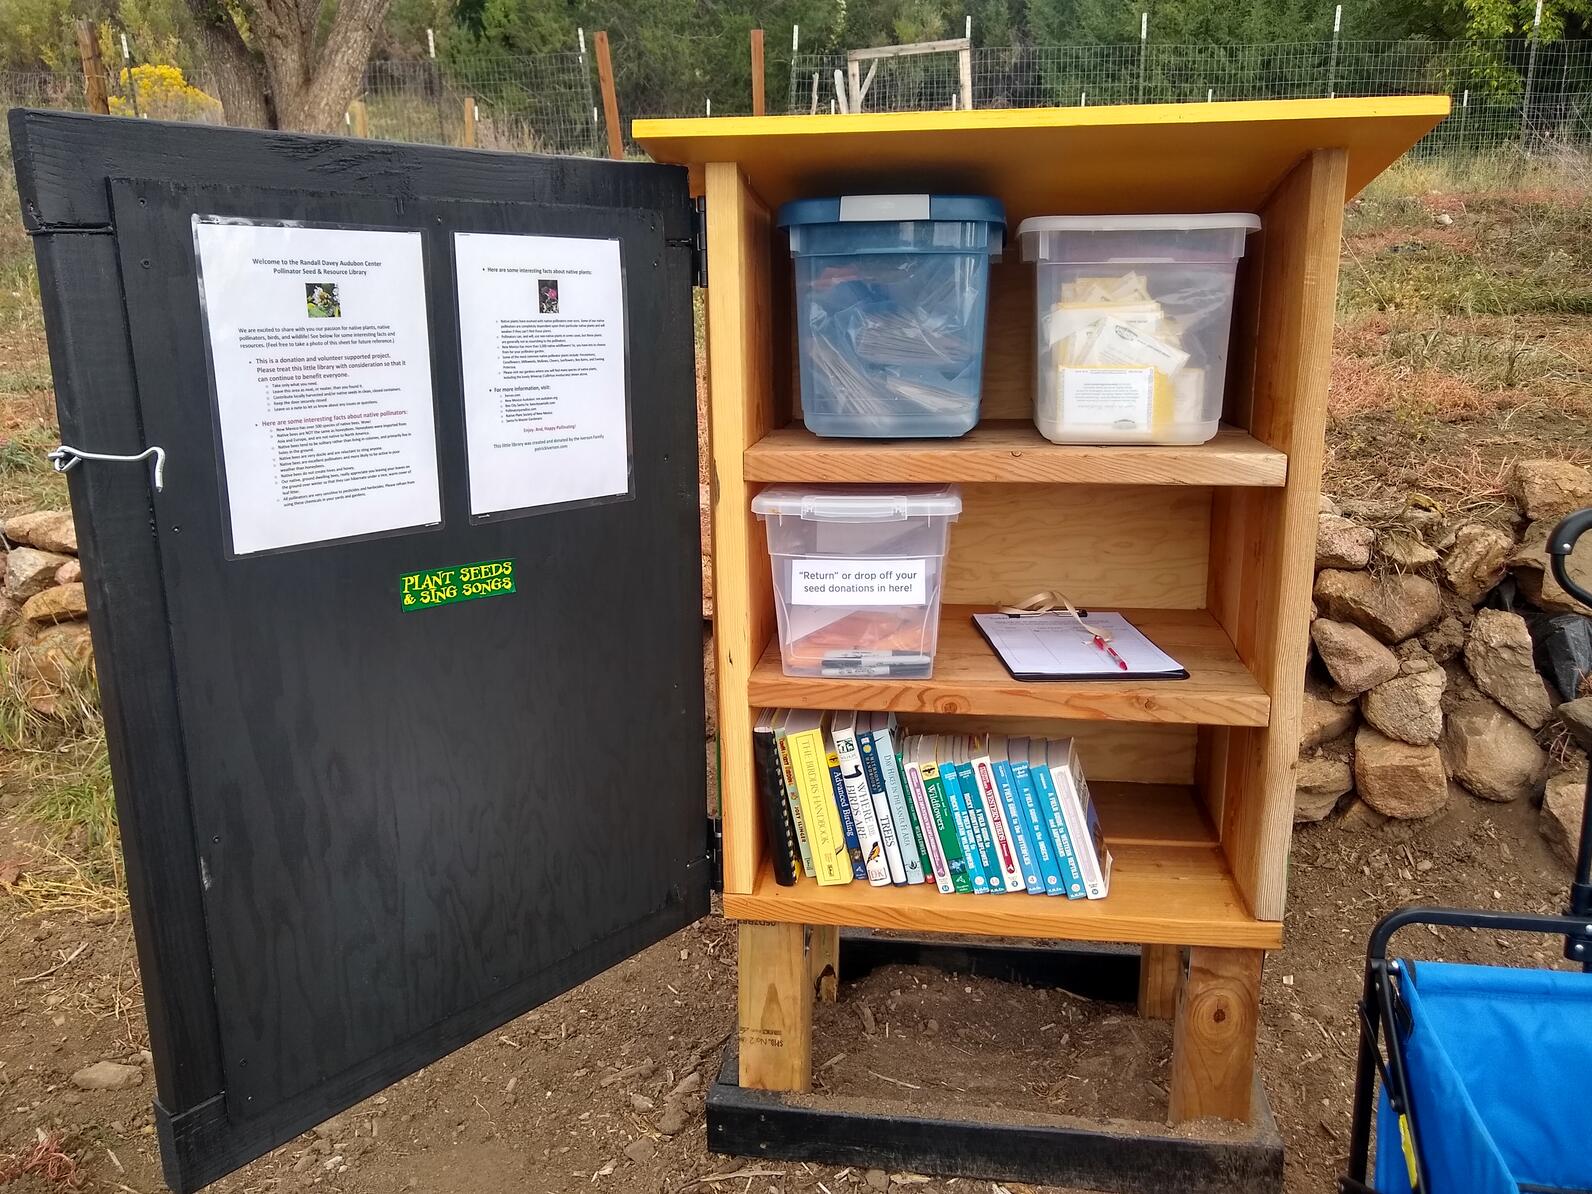 The seed library awaits your visit! Swing by and borrow some seeds for the upcoming growing season. 